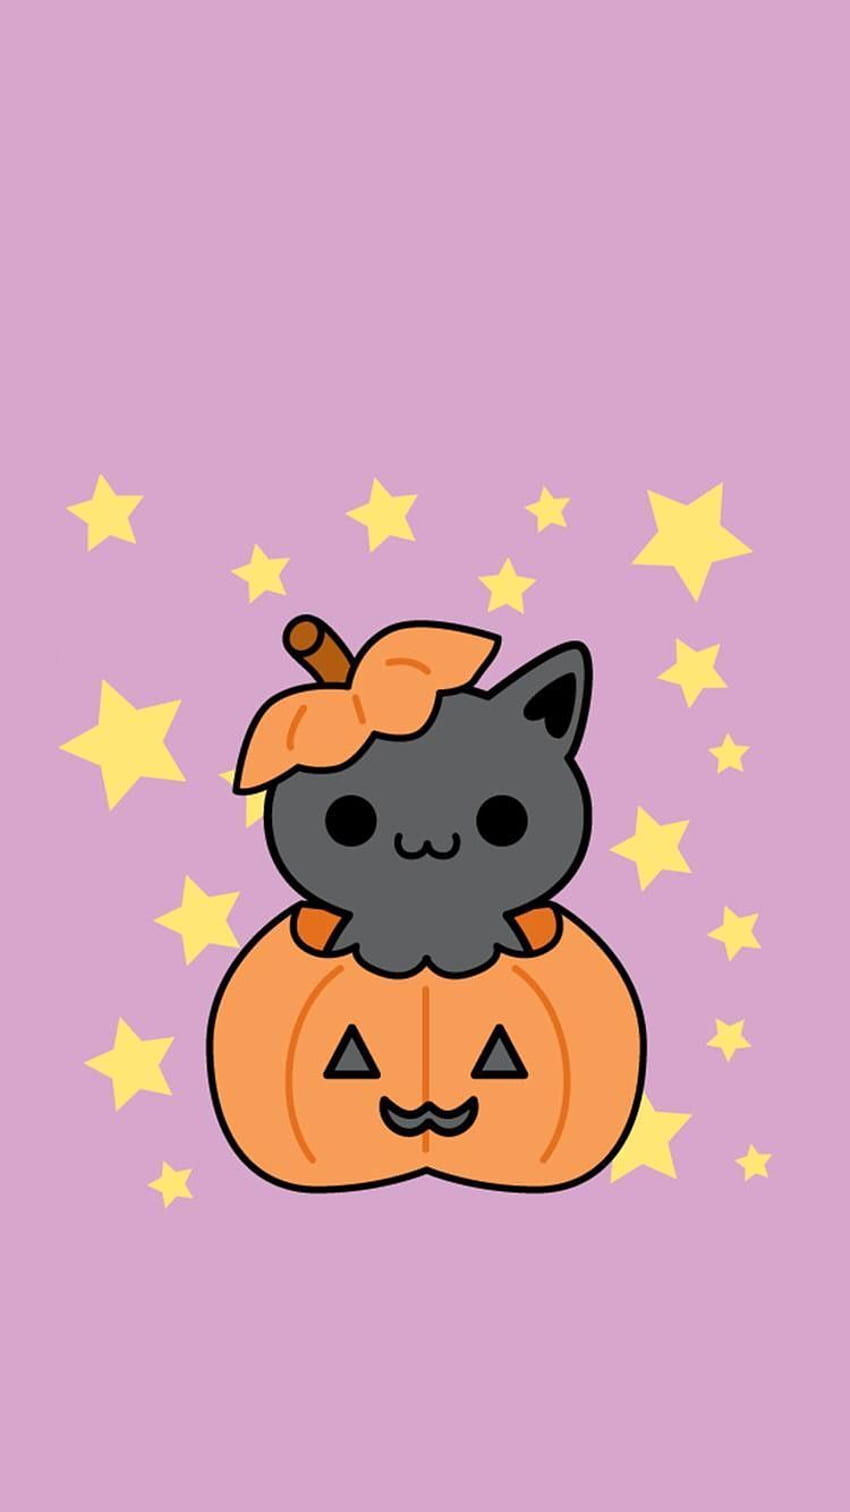 How to Draw Cute Halloween Drawings  Enrique Plazola  Skillshare